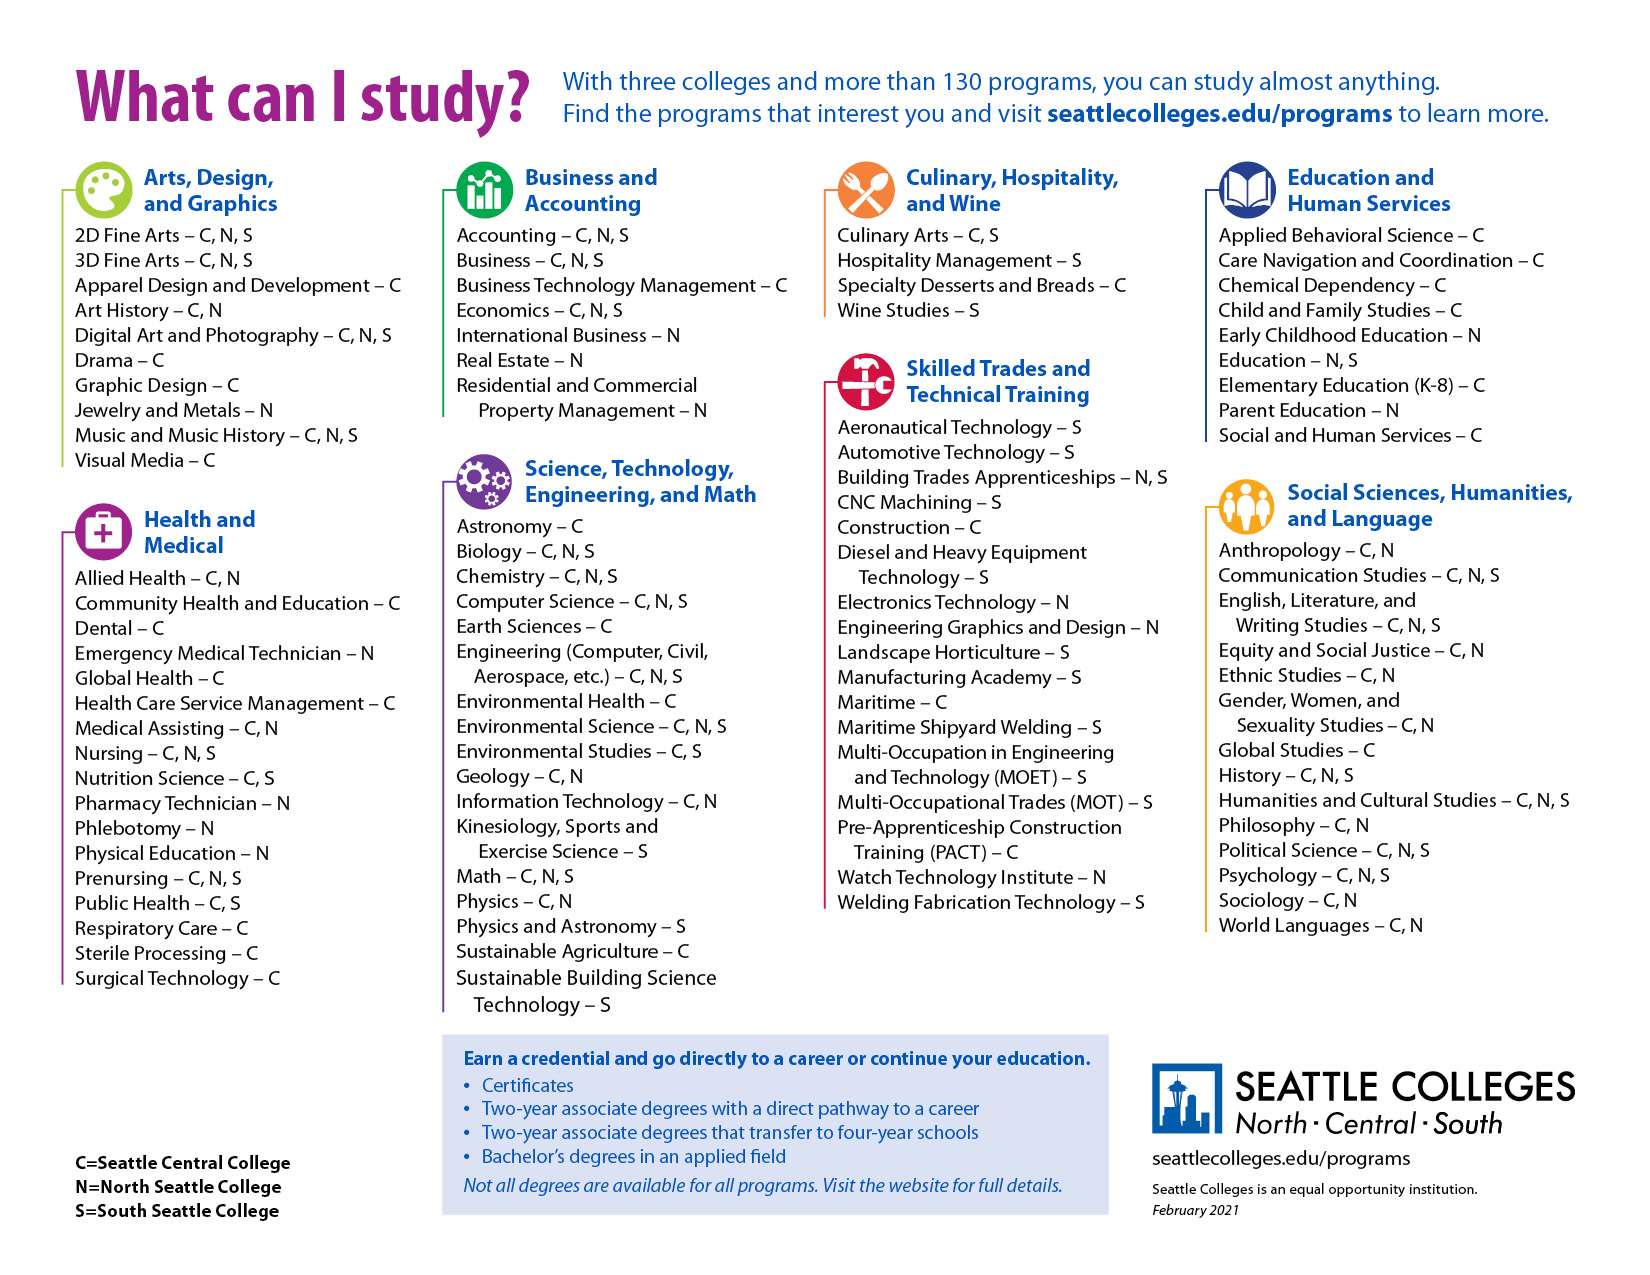 Areas of Study at Seattle Colleges